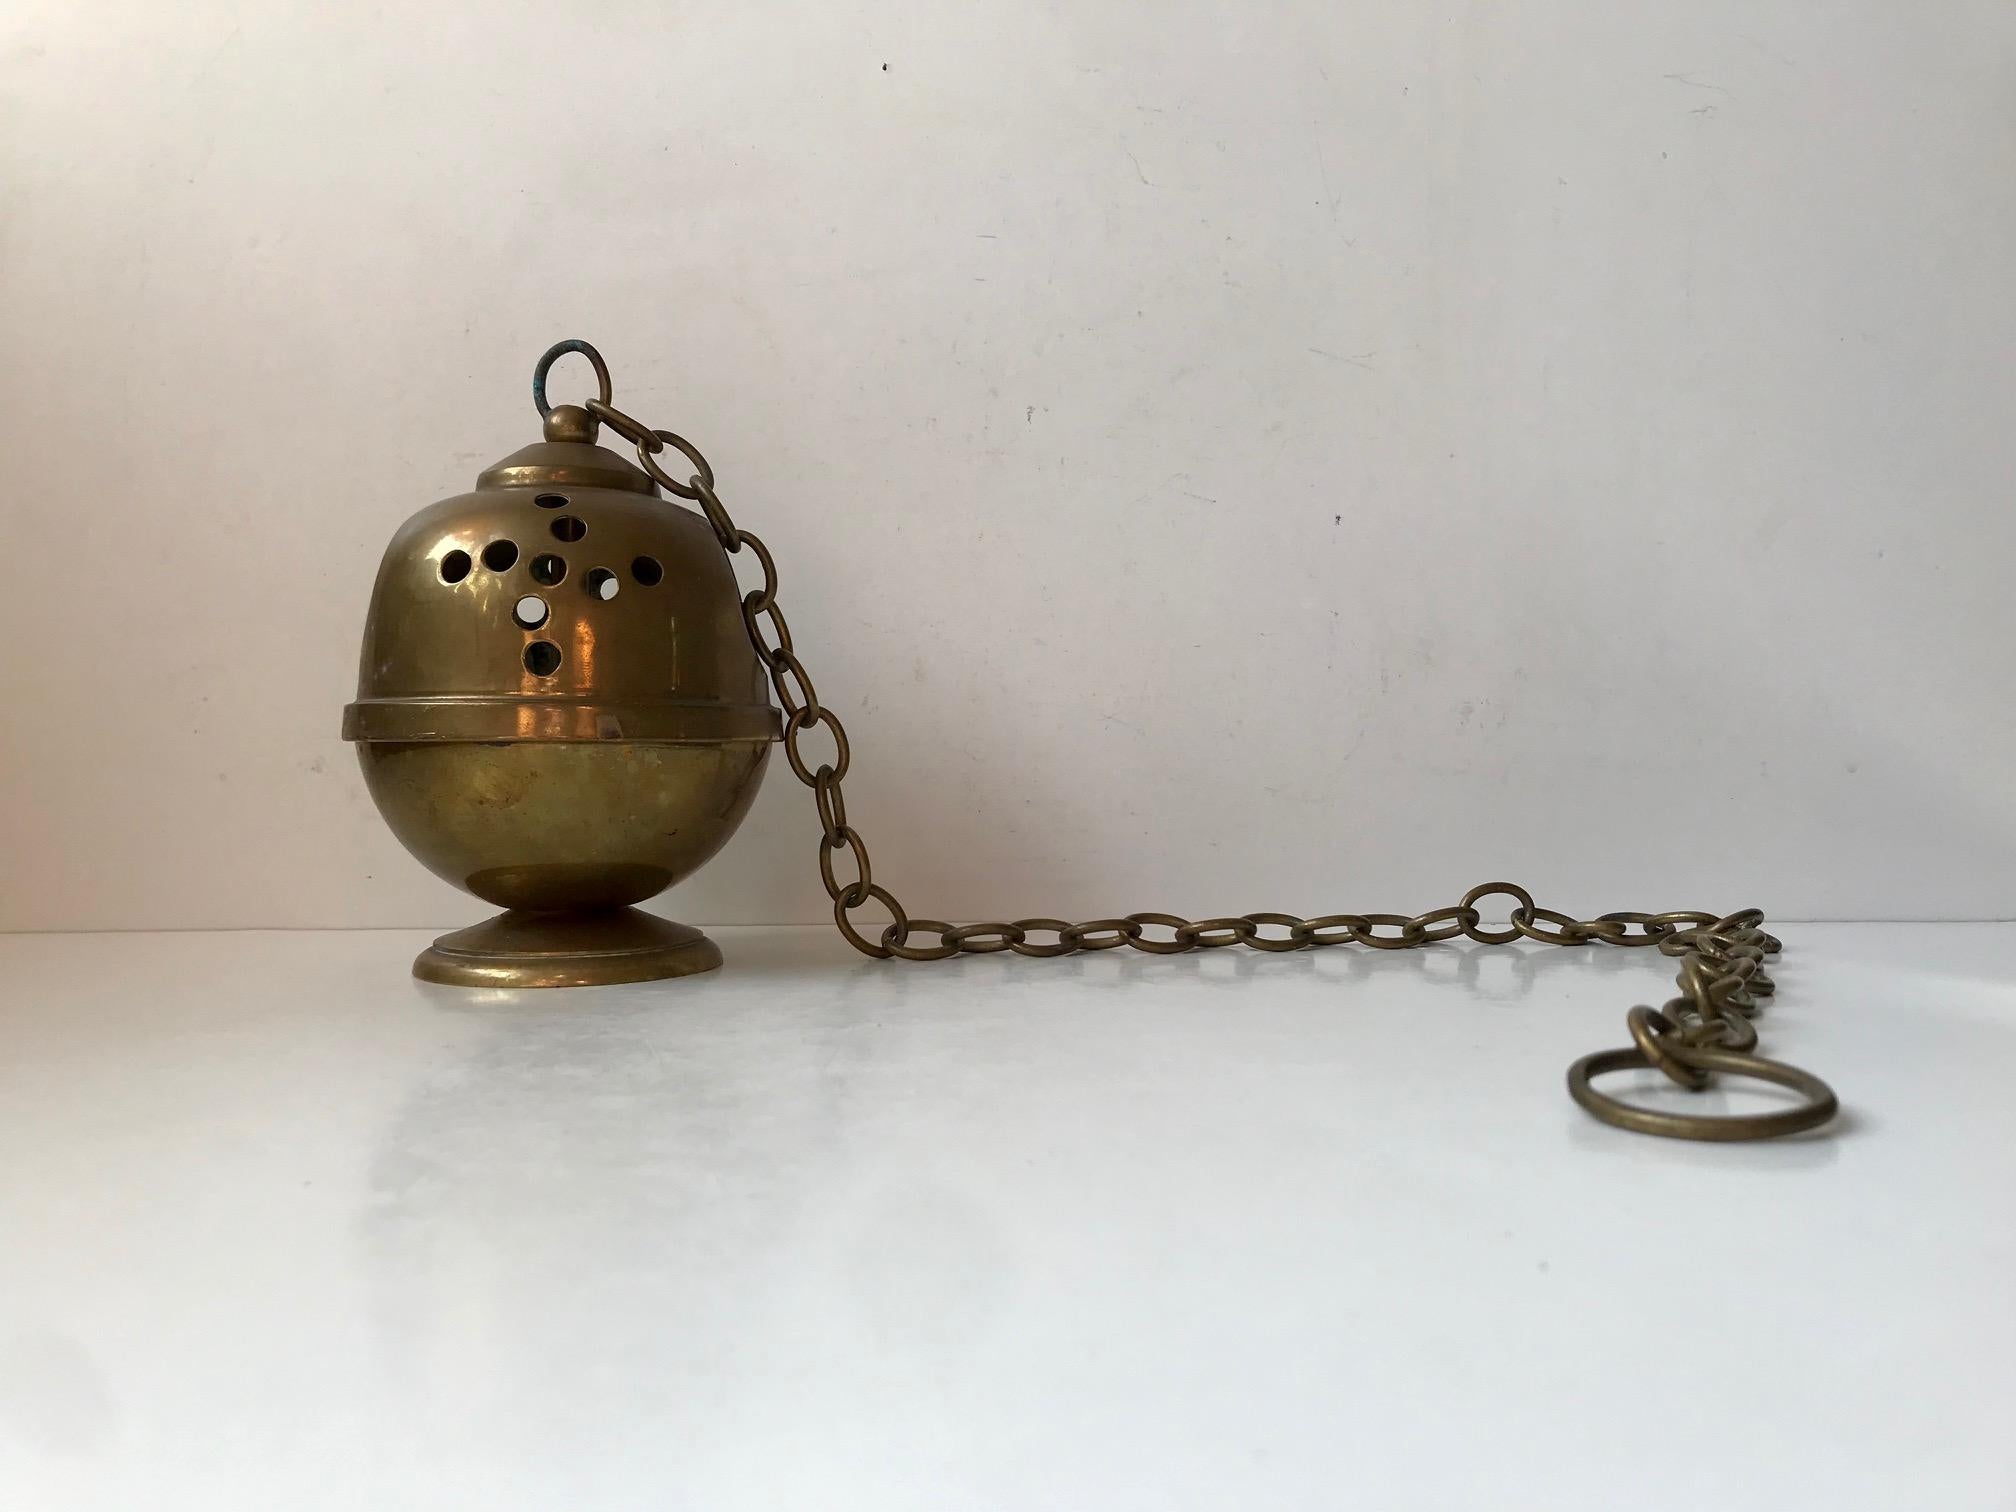 1950s continental incense burner in brass. The plain design testifies that it has been in use. Age consistent ware and patina are present to both the burner and pendulum chain.